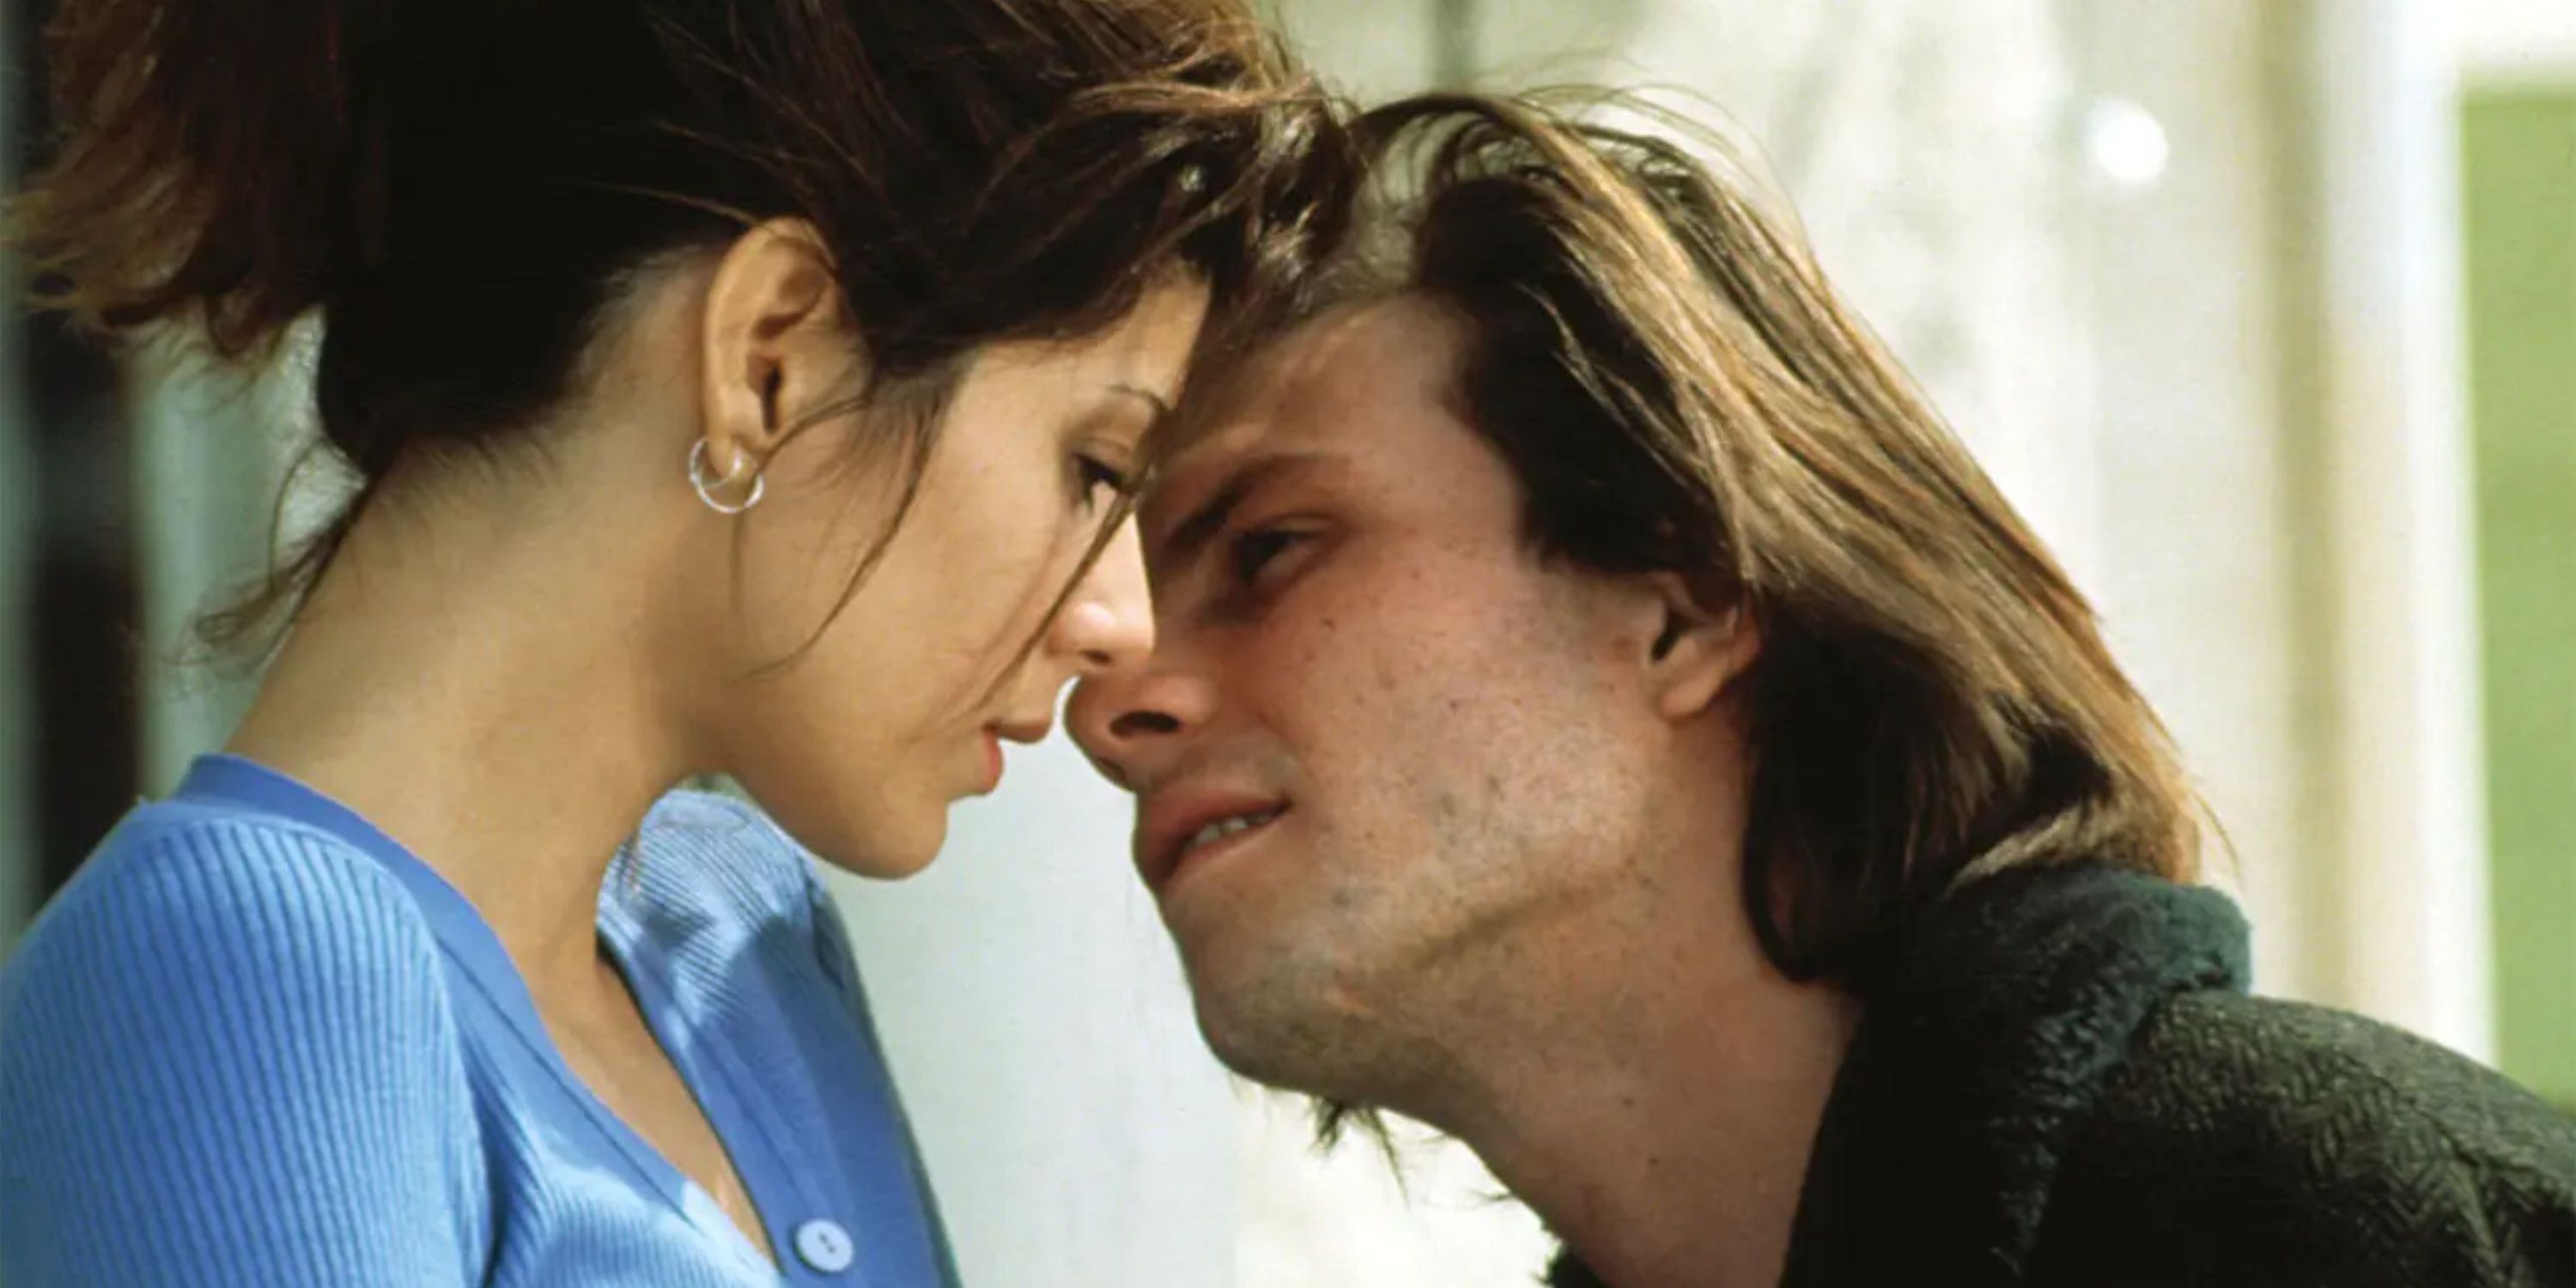 10 Romance Movies That Are Actually Creepy, According to Reddit